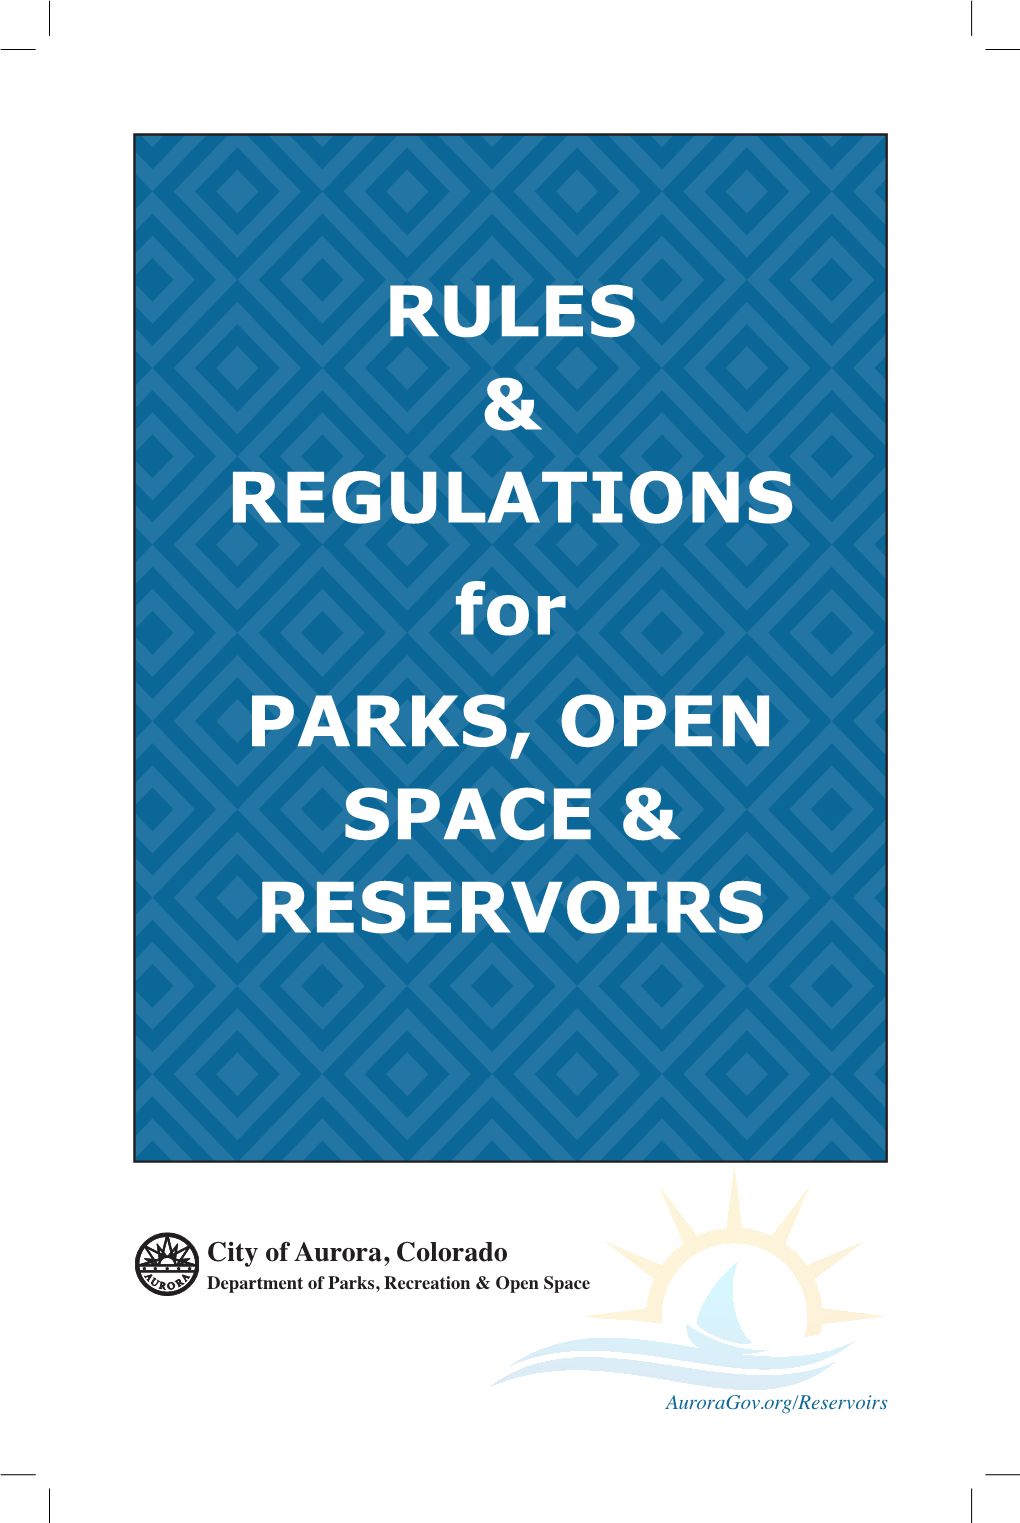 RULES & REGULATIONS for PARKS, OPEN SPACE & RESERVOIRS